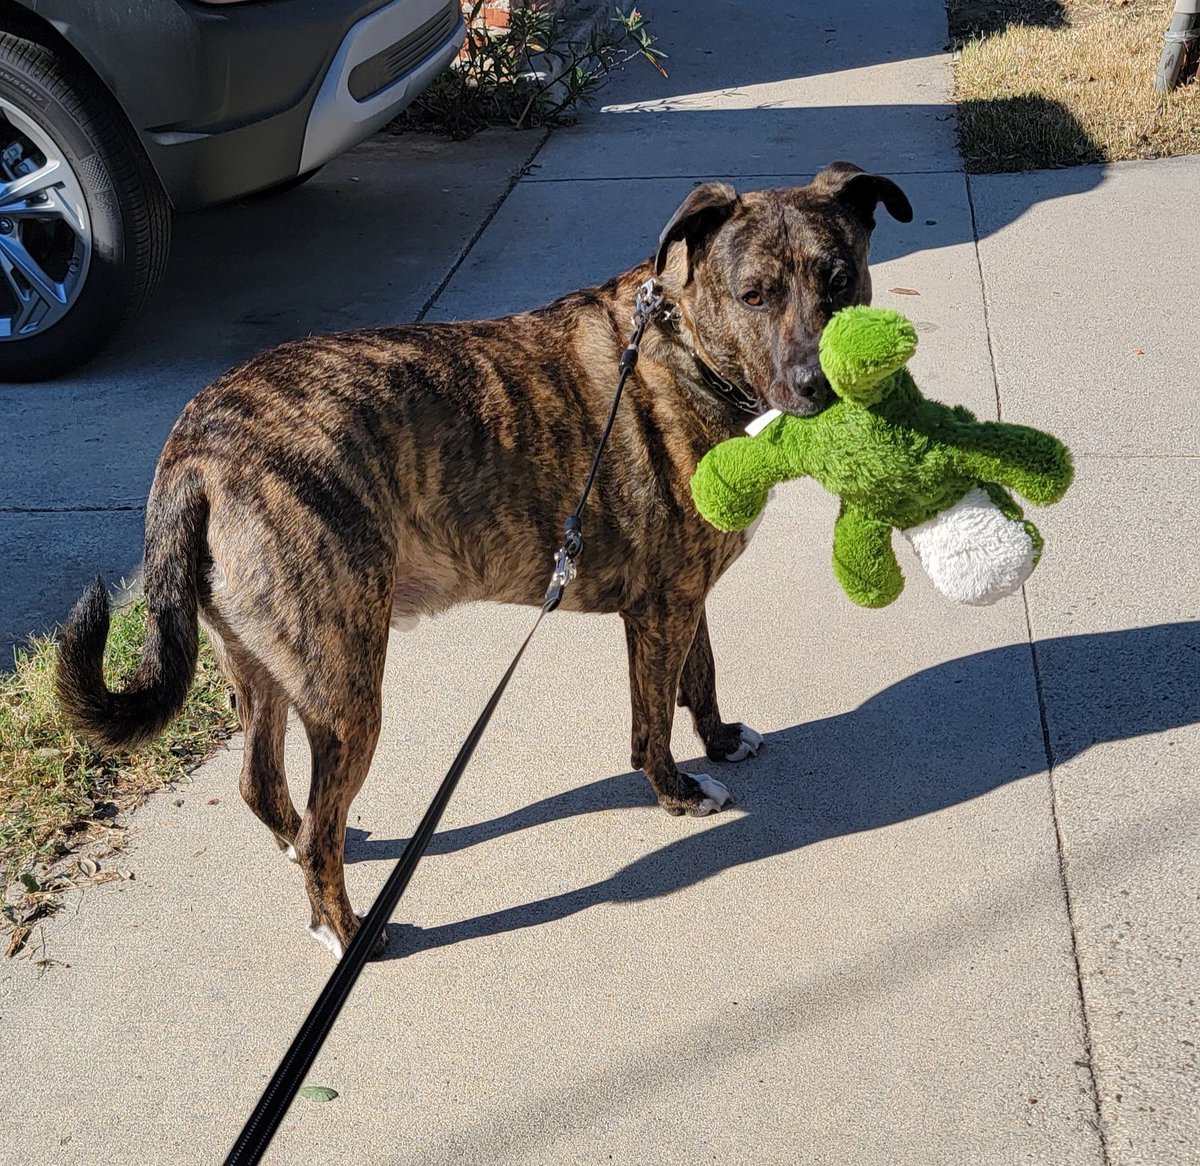 Amos insisted on walking w his favorite toy today. Only set it down to pee. I love goofy dogs & he makes me laugh everyday! #rescuedogsrock #Dogs